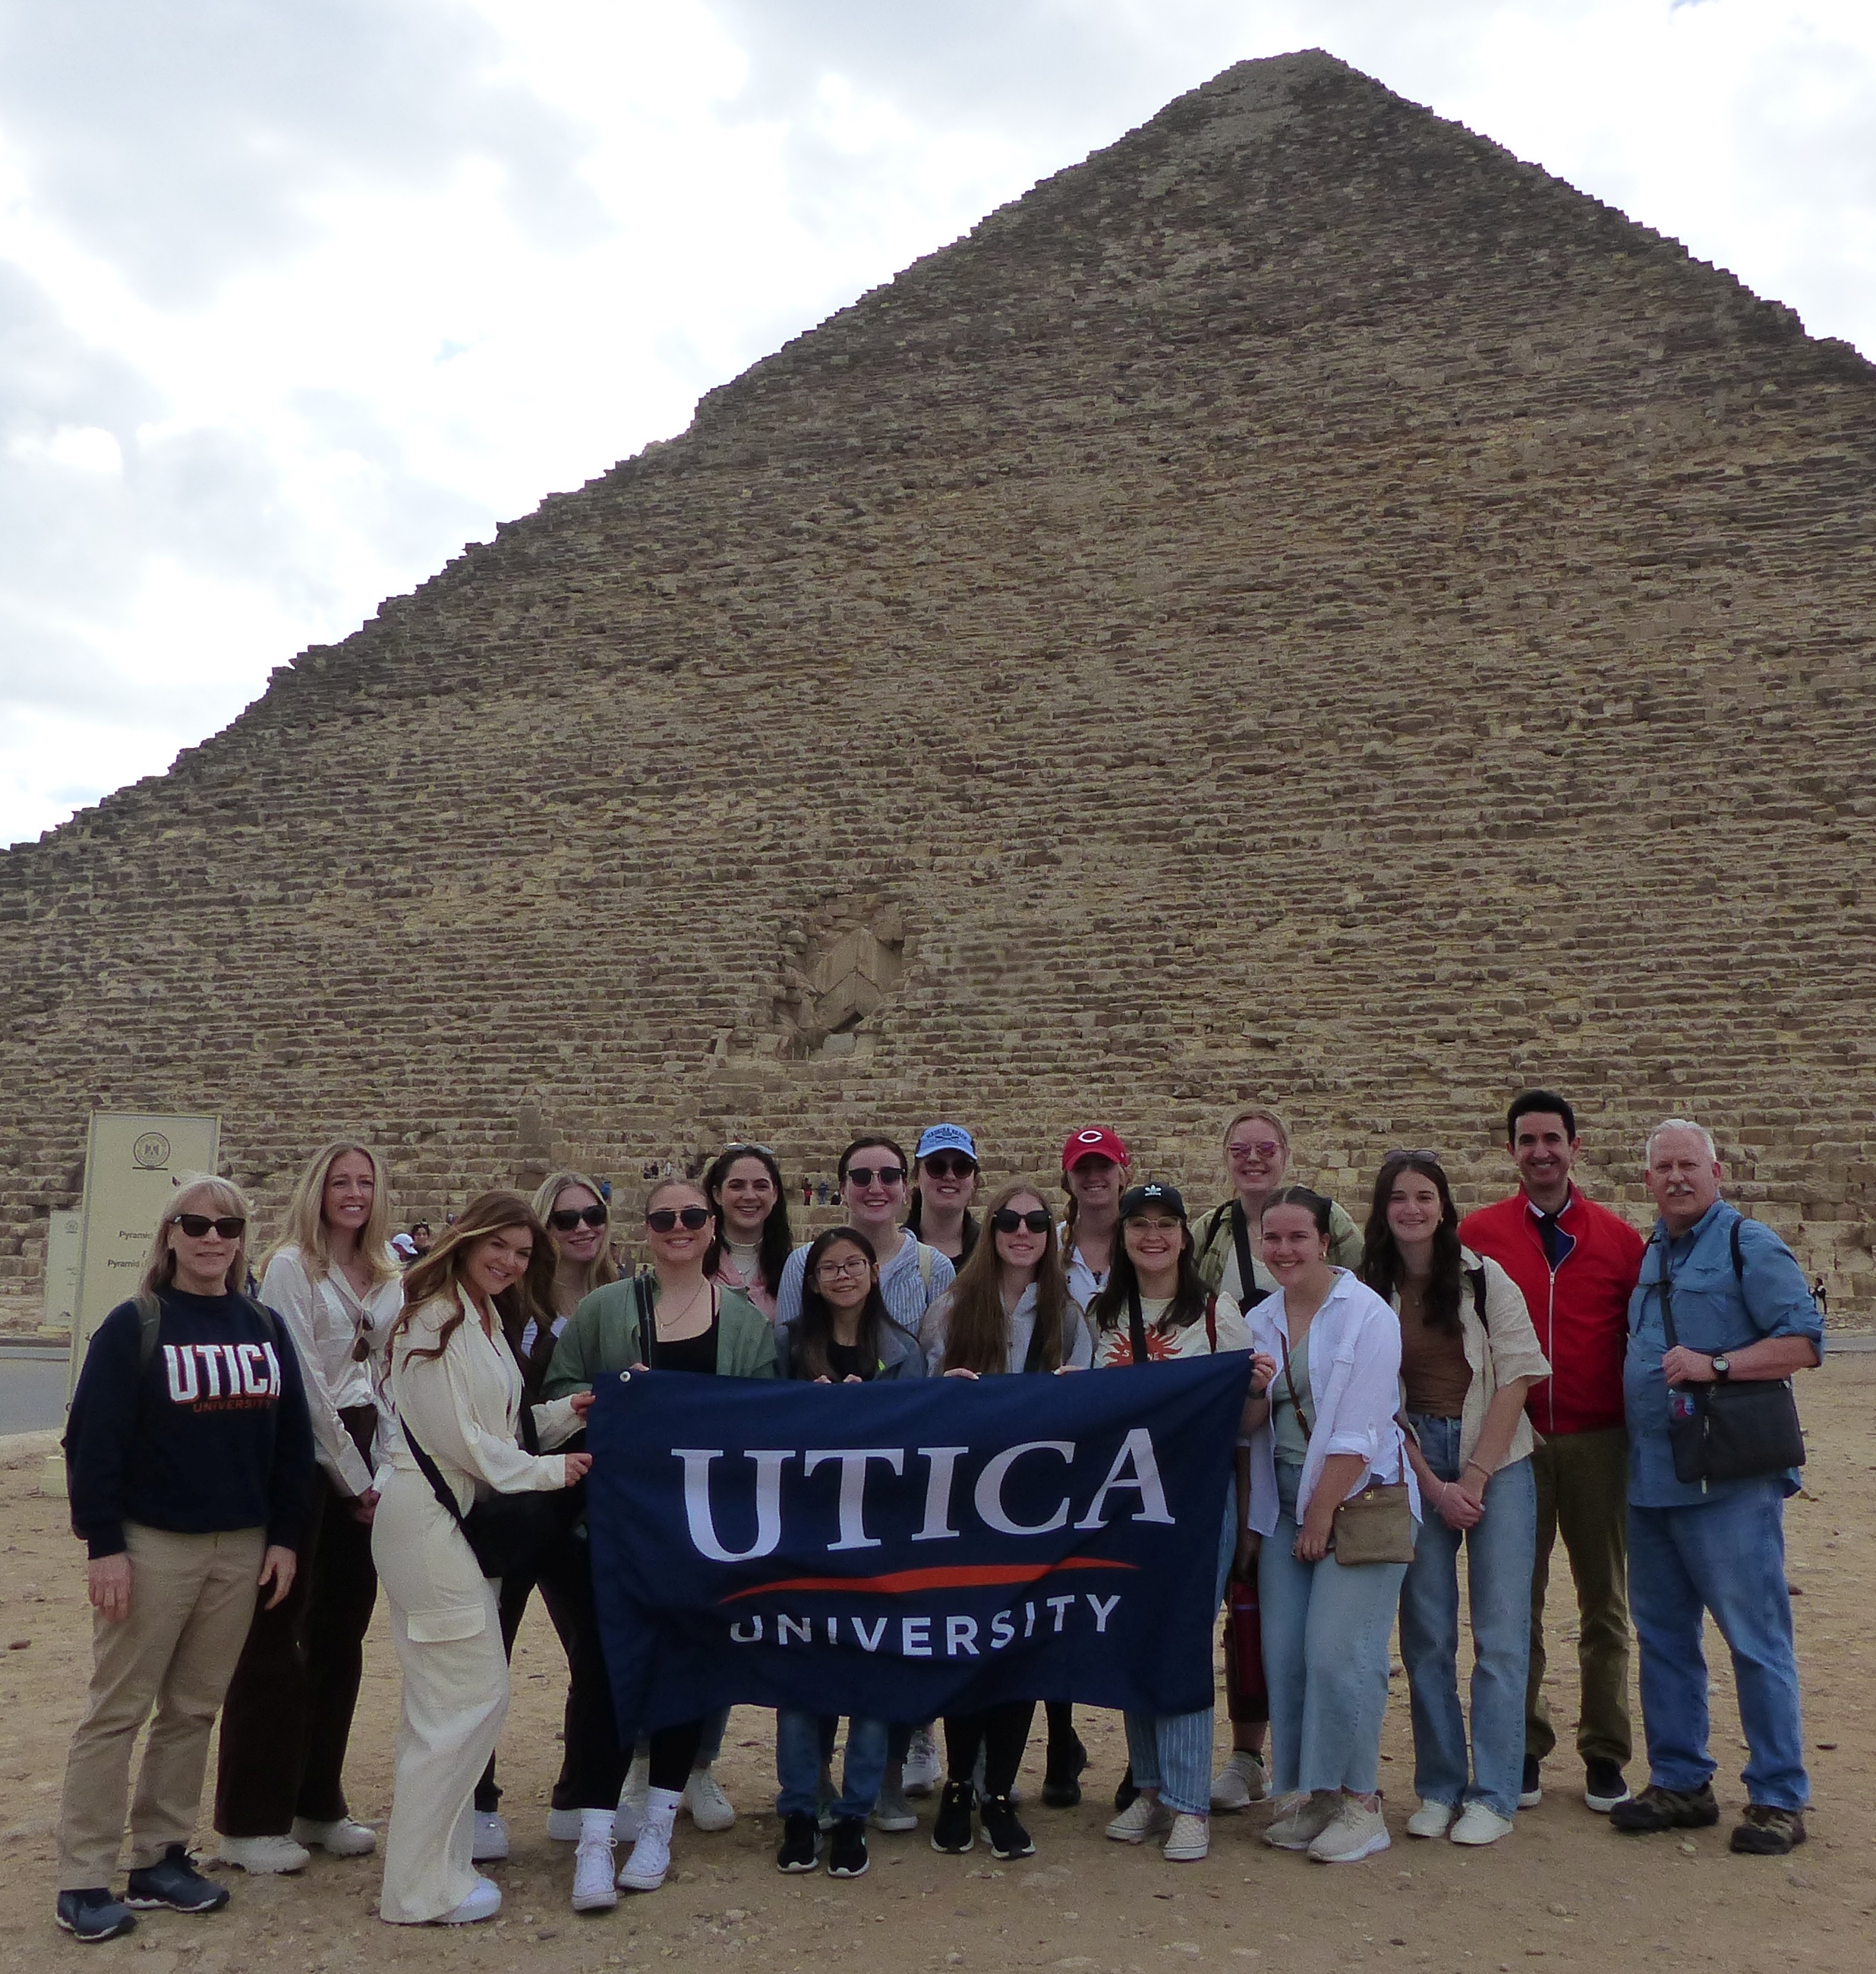 Students and Faculty hold up a Utica University banner at the Great Pyramid during a January 2023 visit to Egypt.